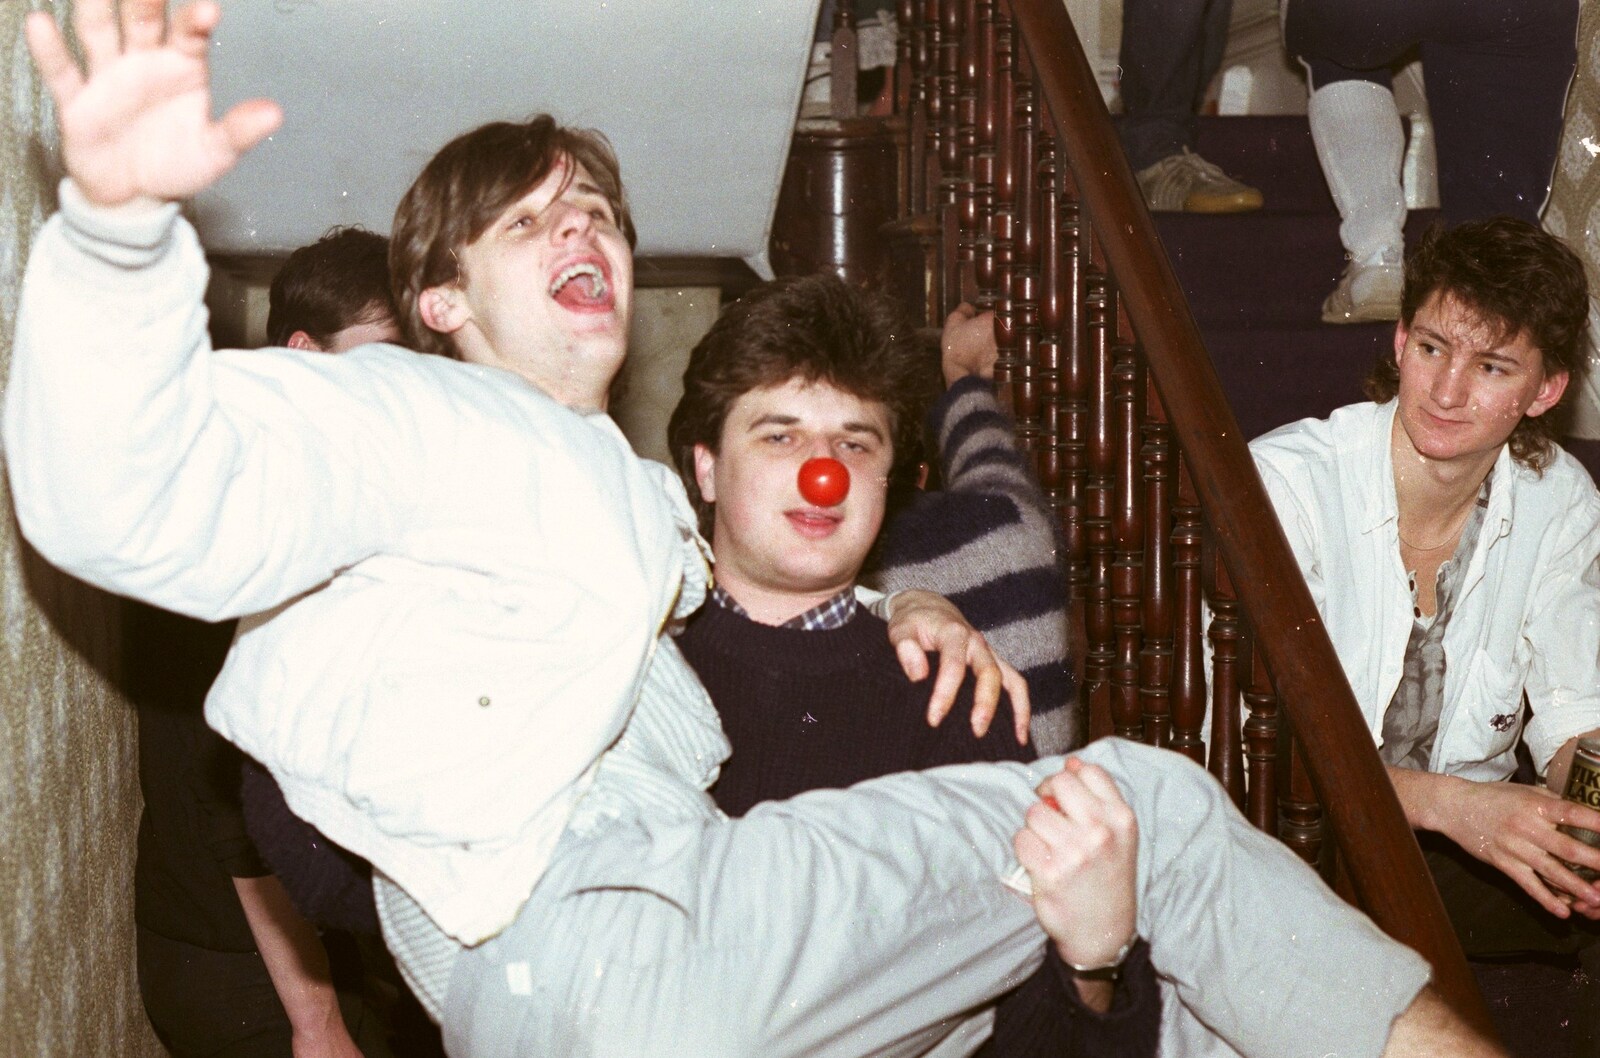 Russell Yeatman sits on the stairs from Uni: Simon Read's Party, North Road East, Plymouth - 10th October 1986